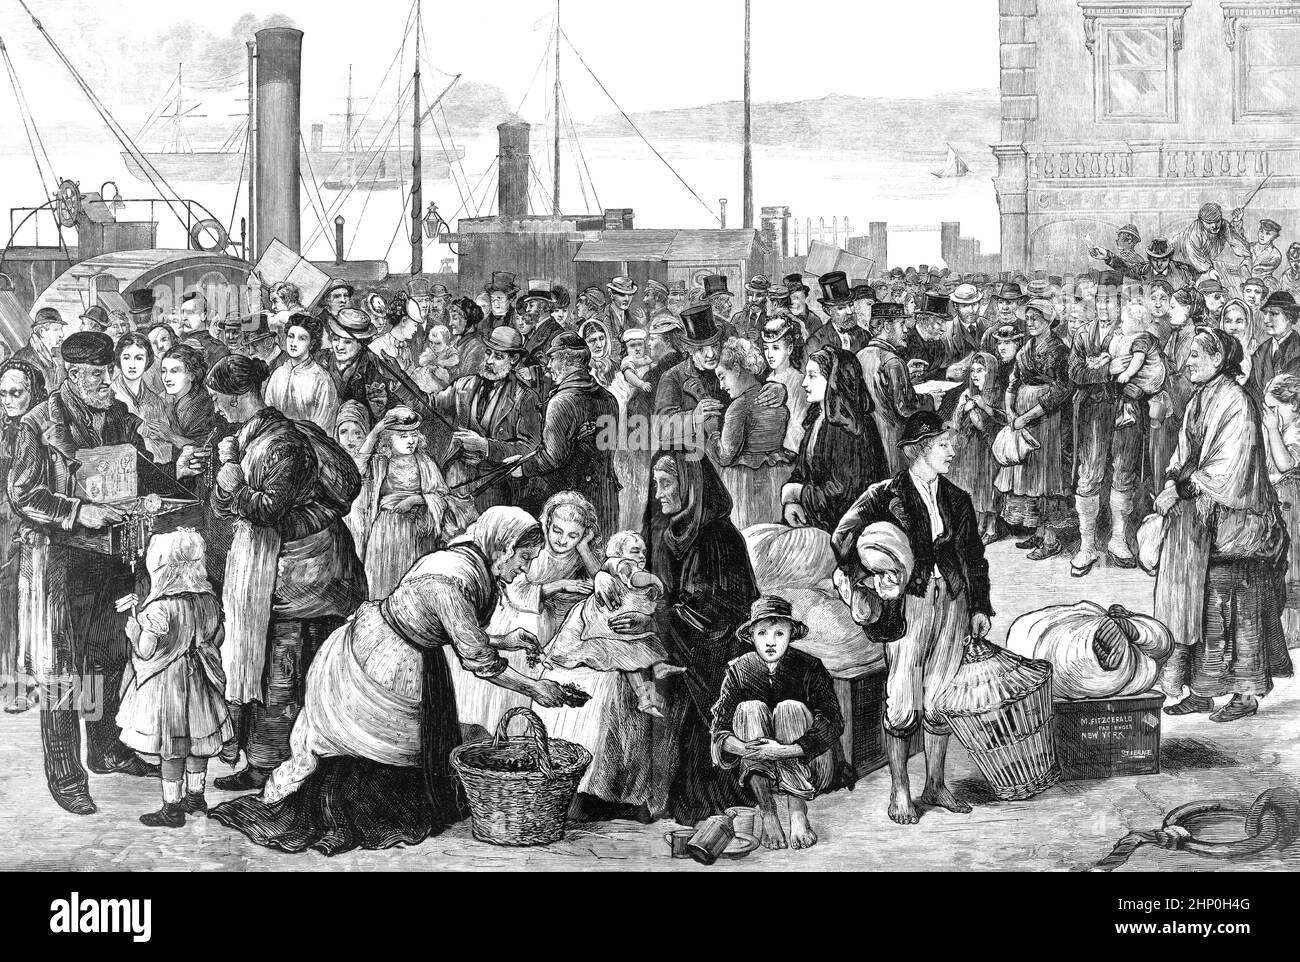 A 19th Century illustration of Irish immigrants leaving Queenstown (Cobh) in County Cork for America during the Great Famine, aka the Famine or the Irish Potato Famine (mostly outside Ireland), a period of mass starvation and disease in Ireland from 1845 to 1852; the most severely affected areas being in the west and south of Ireland, where the Irish language was dominant. During the famine about 1 million people died and more than a million fled the country,  causing the country's population to fall by 20–25%. Stock Photo